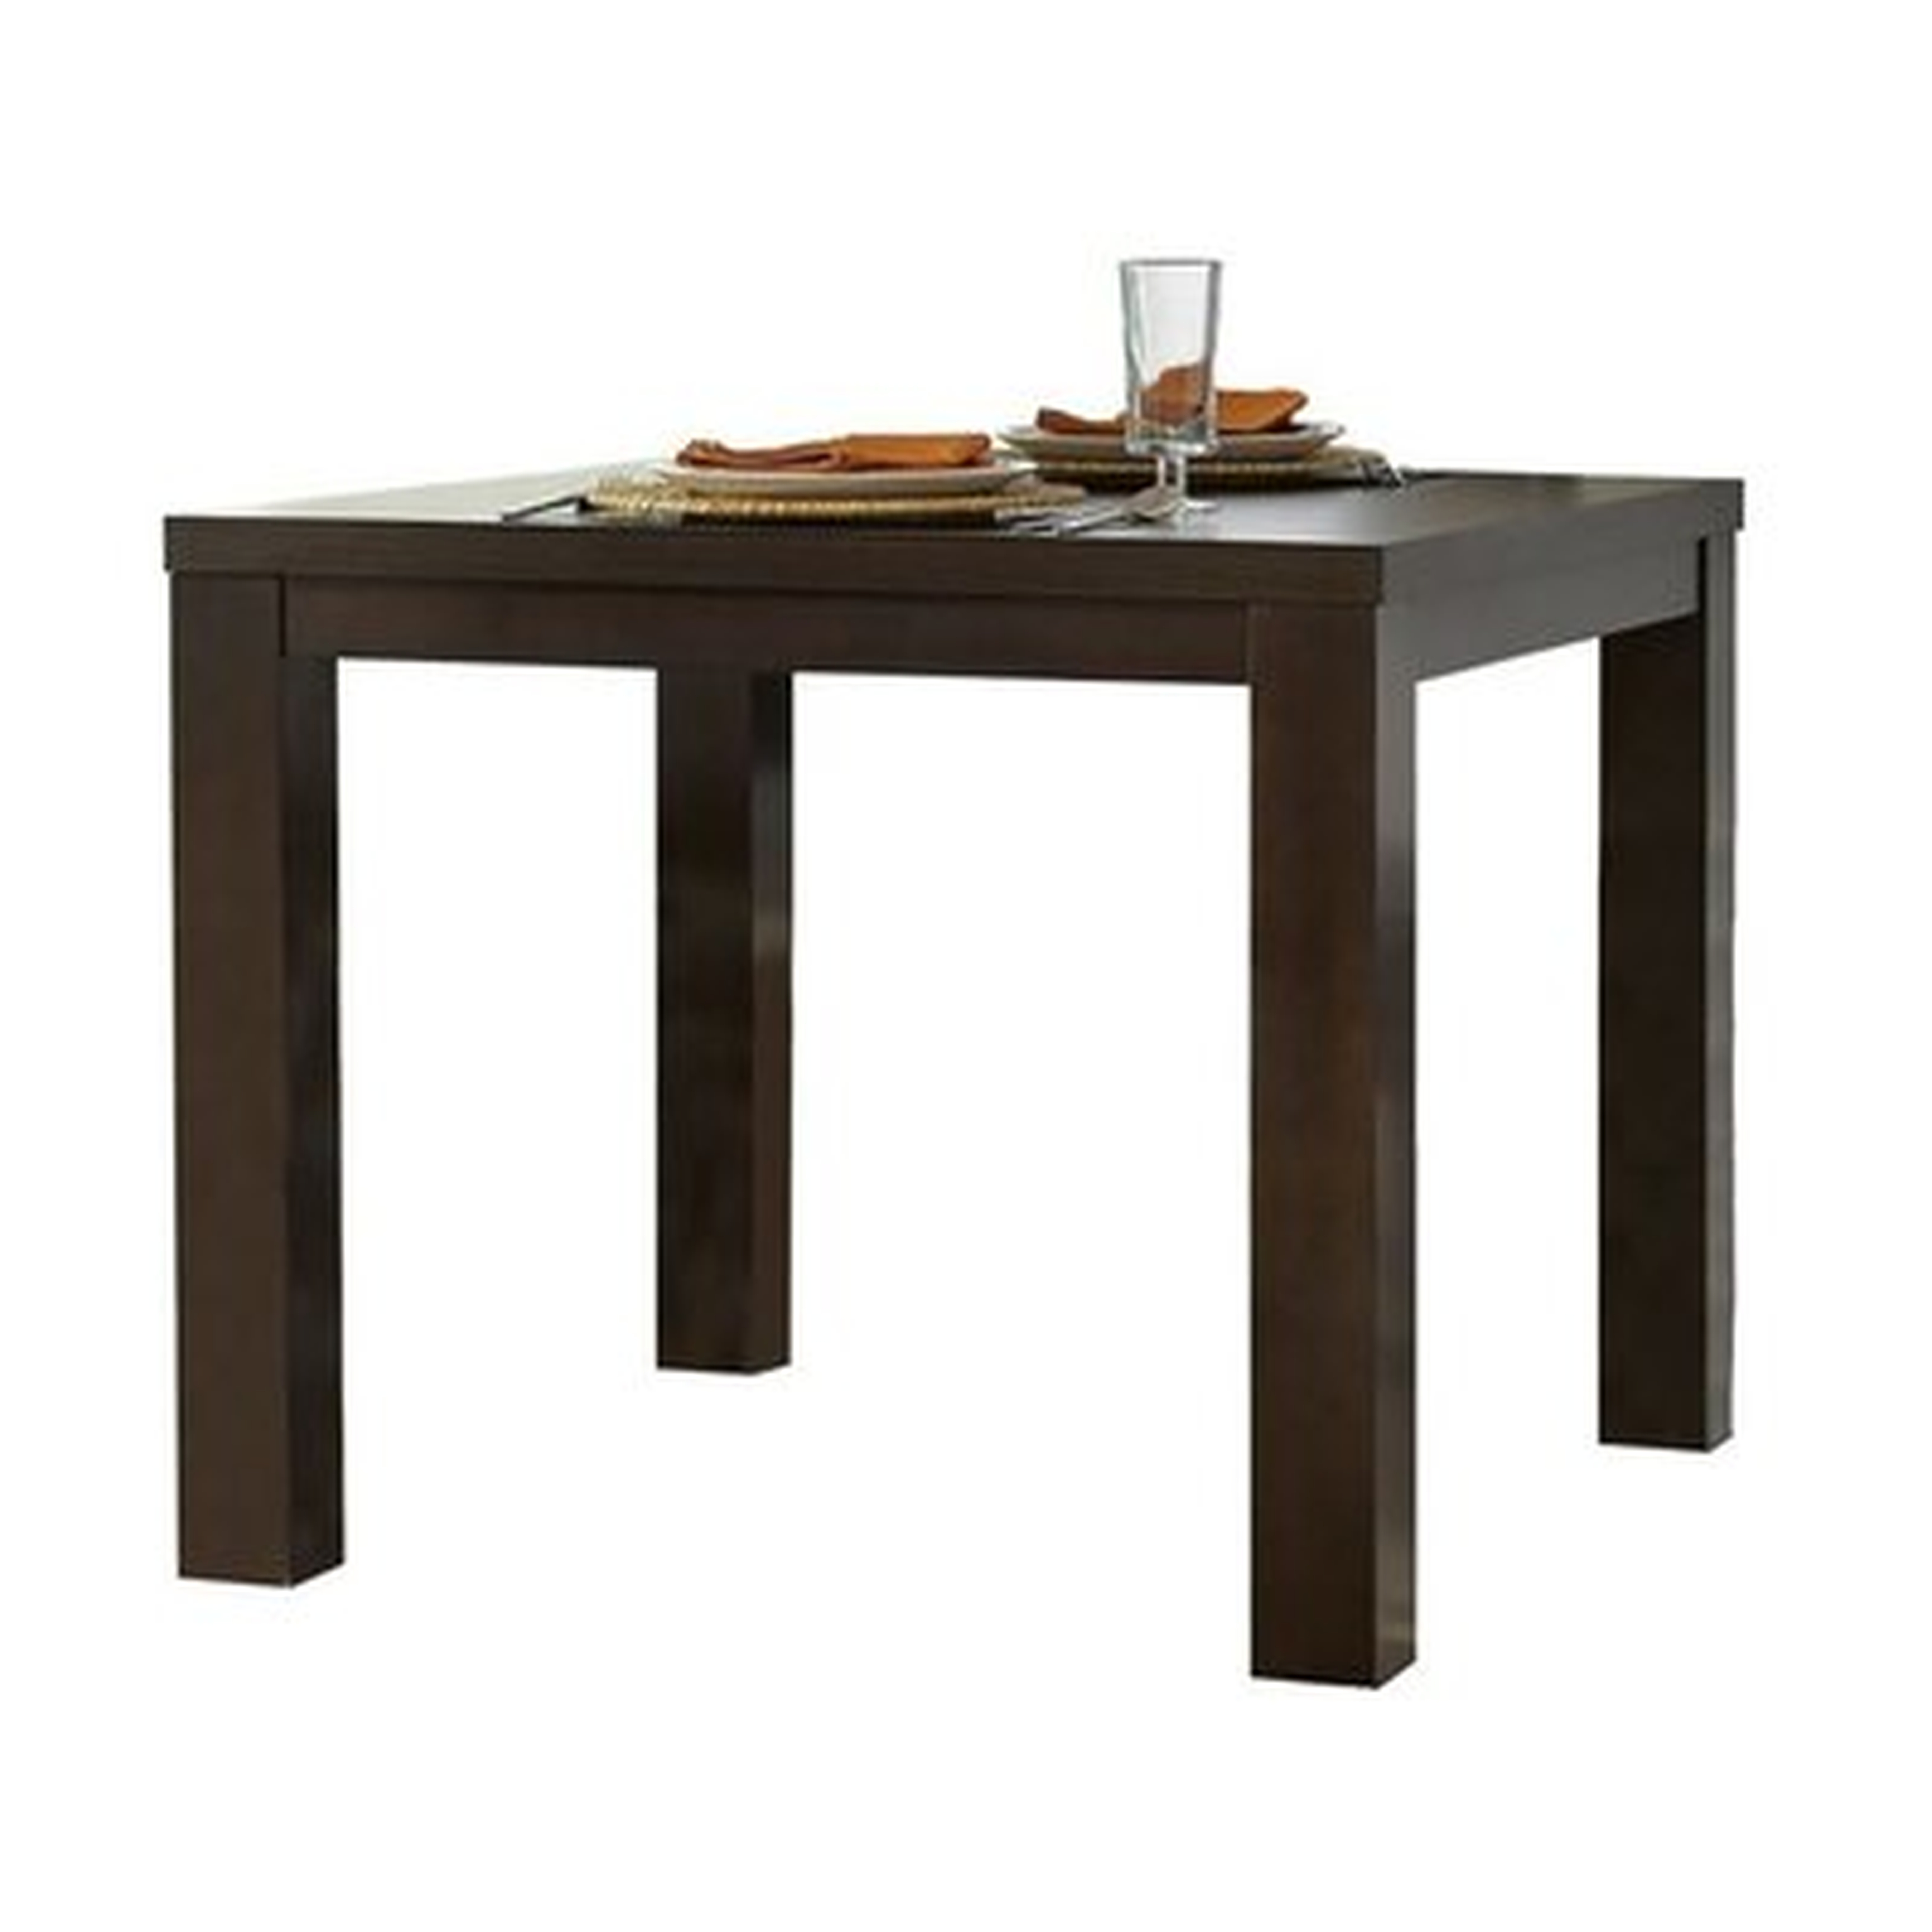 Vernet Square Dining Table - Wayfair